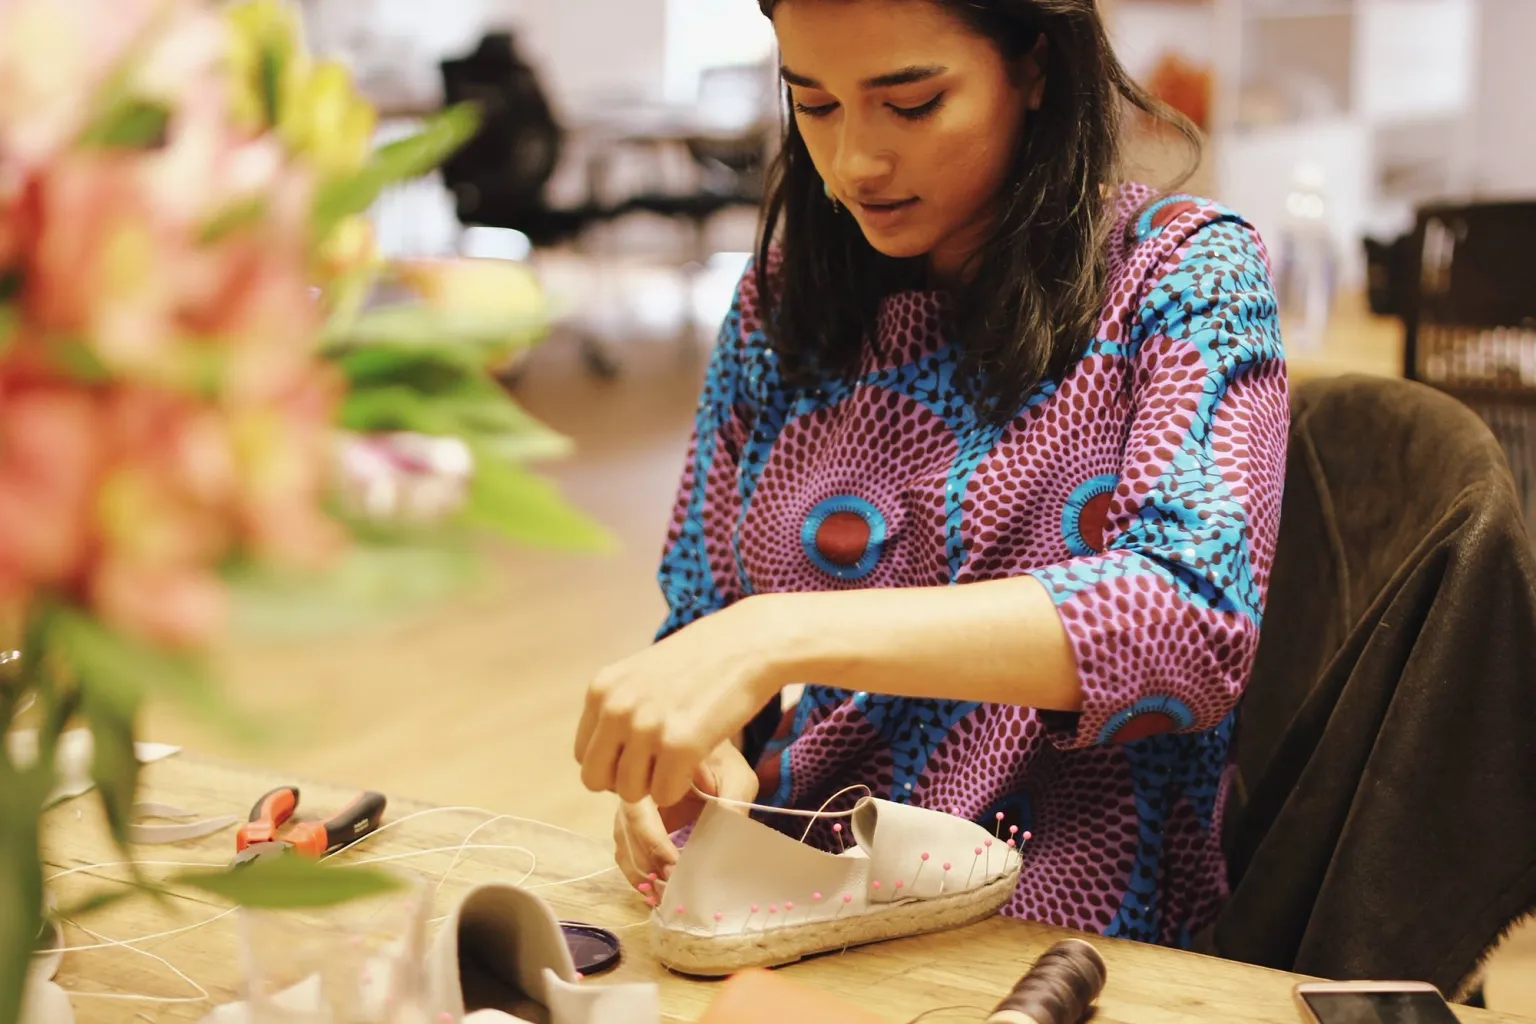 Reclaimed leather shoes that empower women